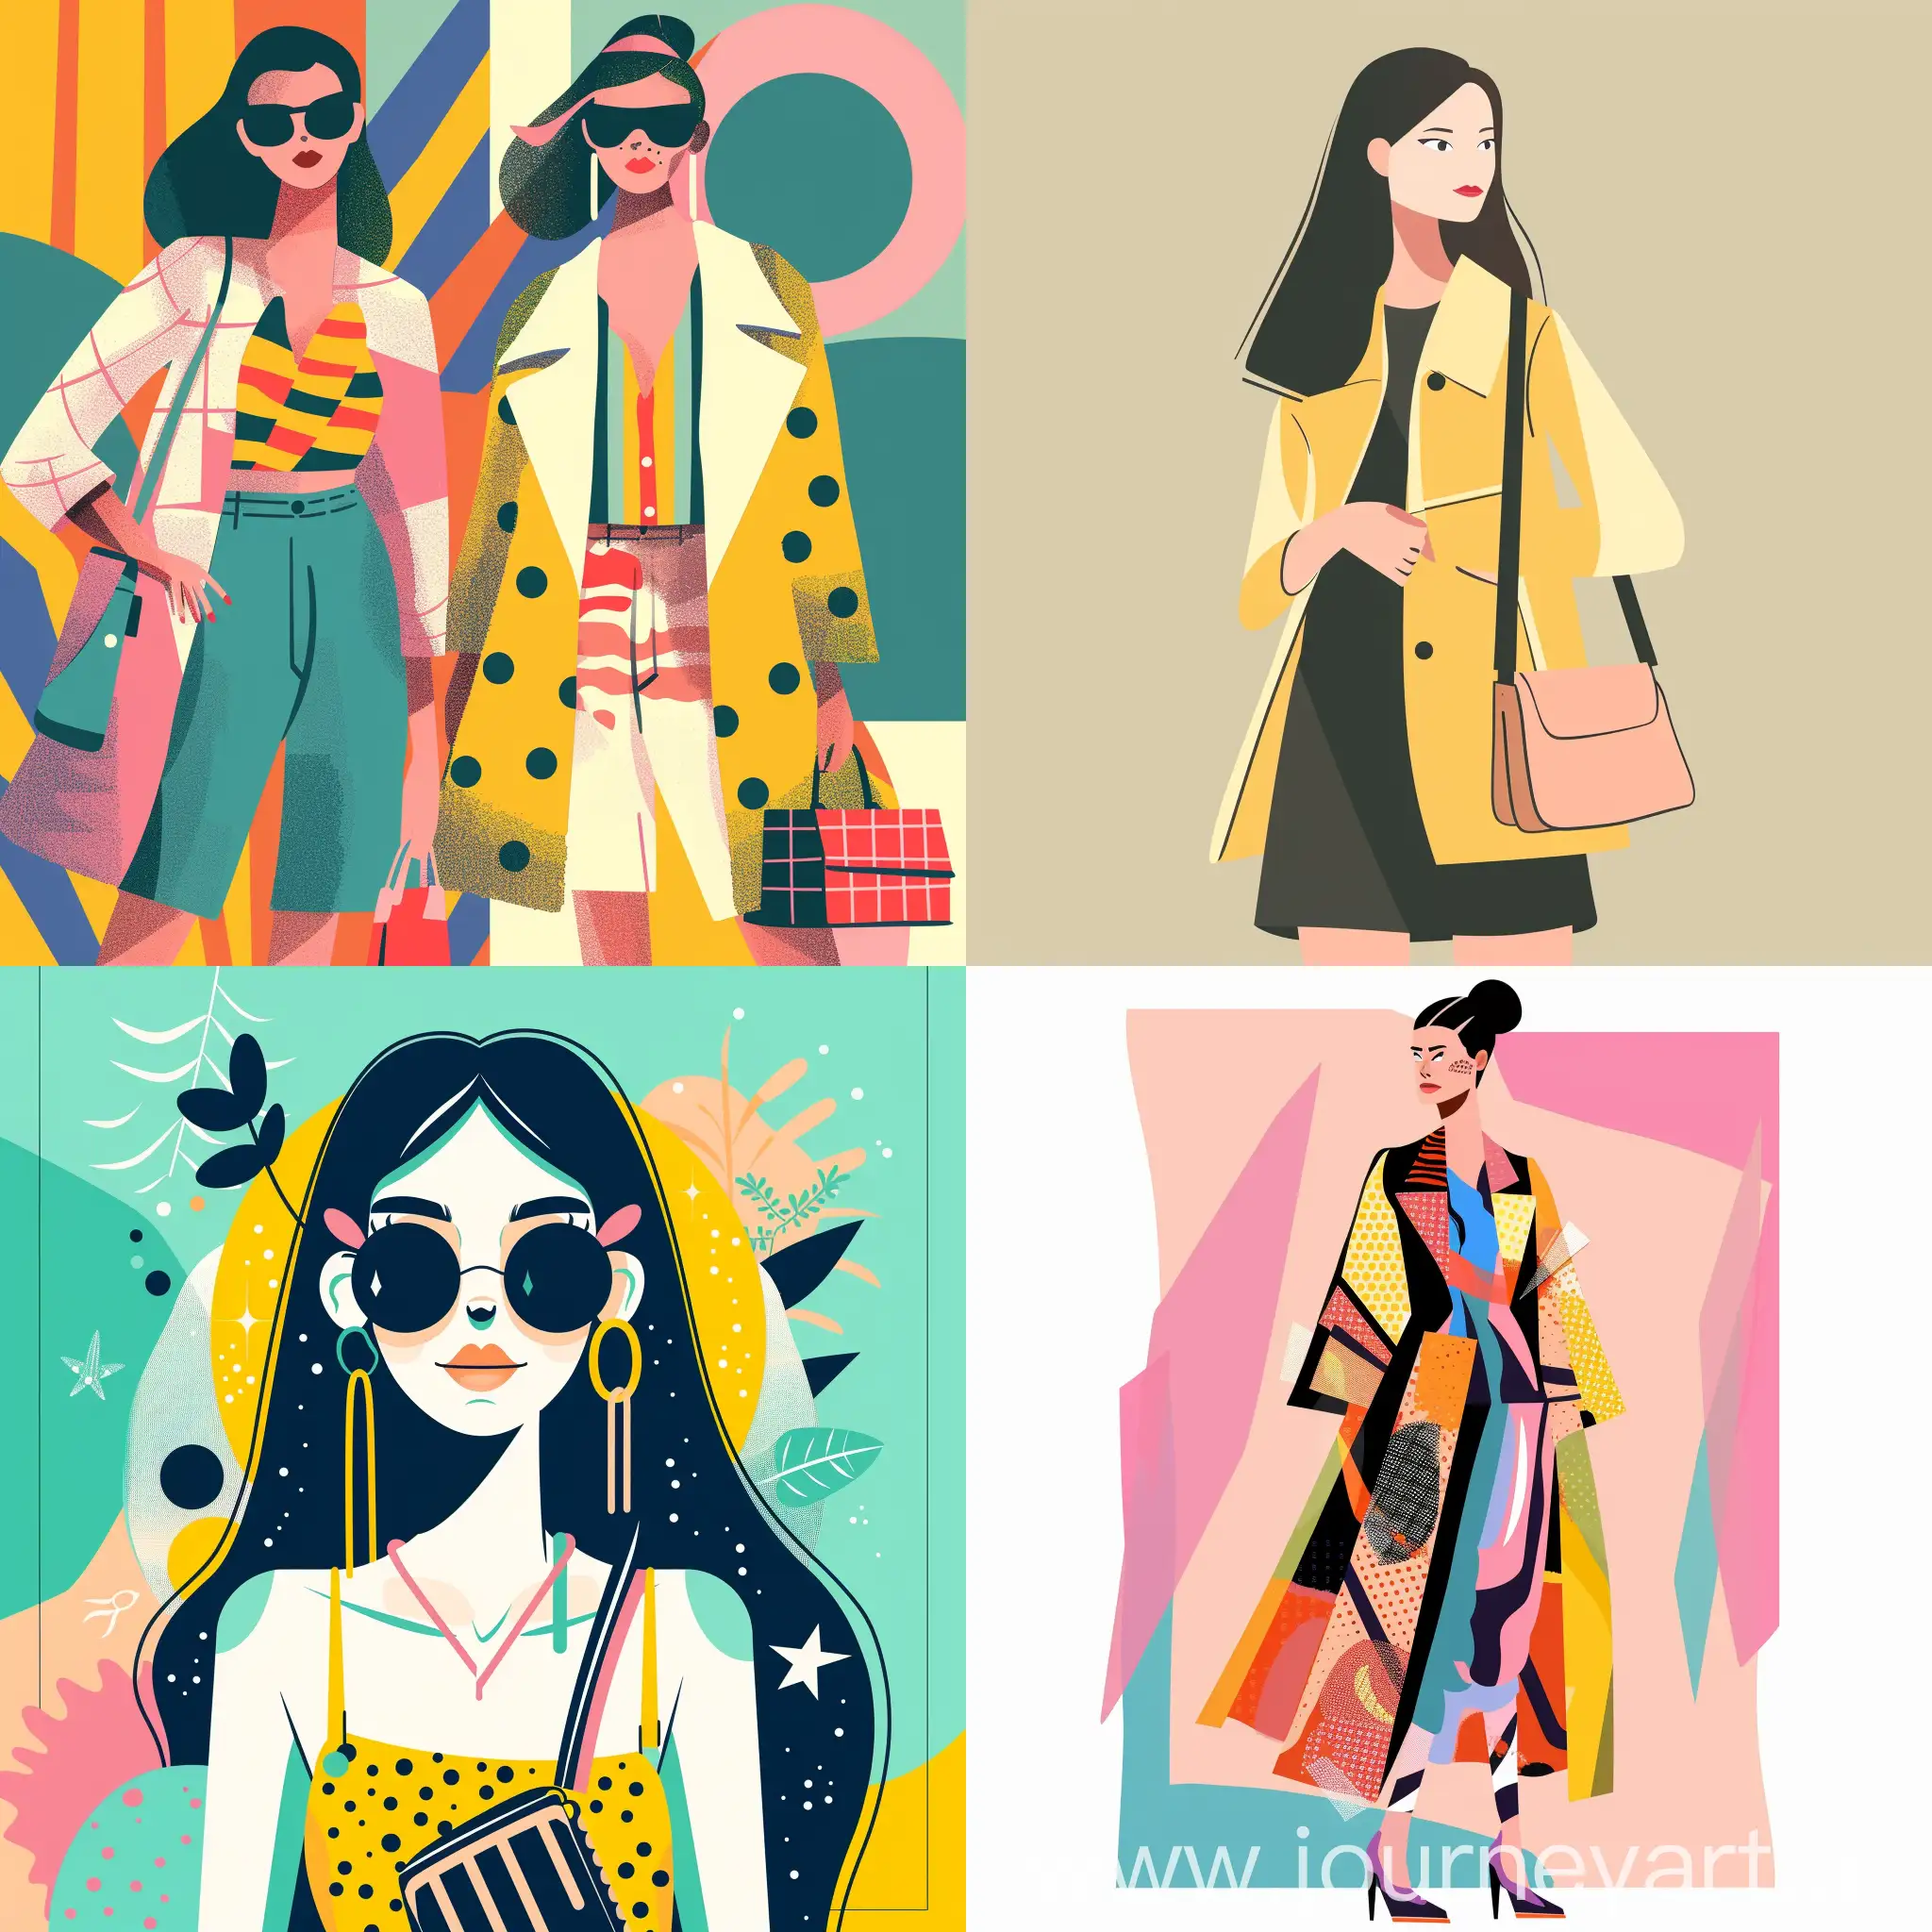 Trendy-Flat-Illustration-of-Fashionable-Outfits